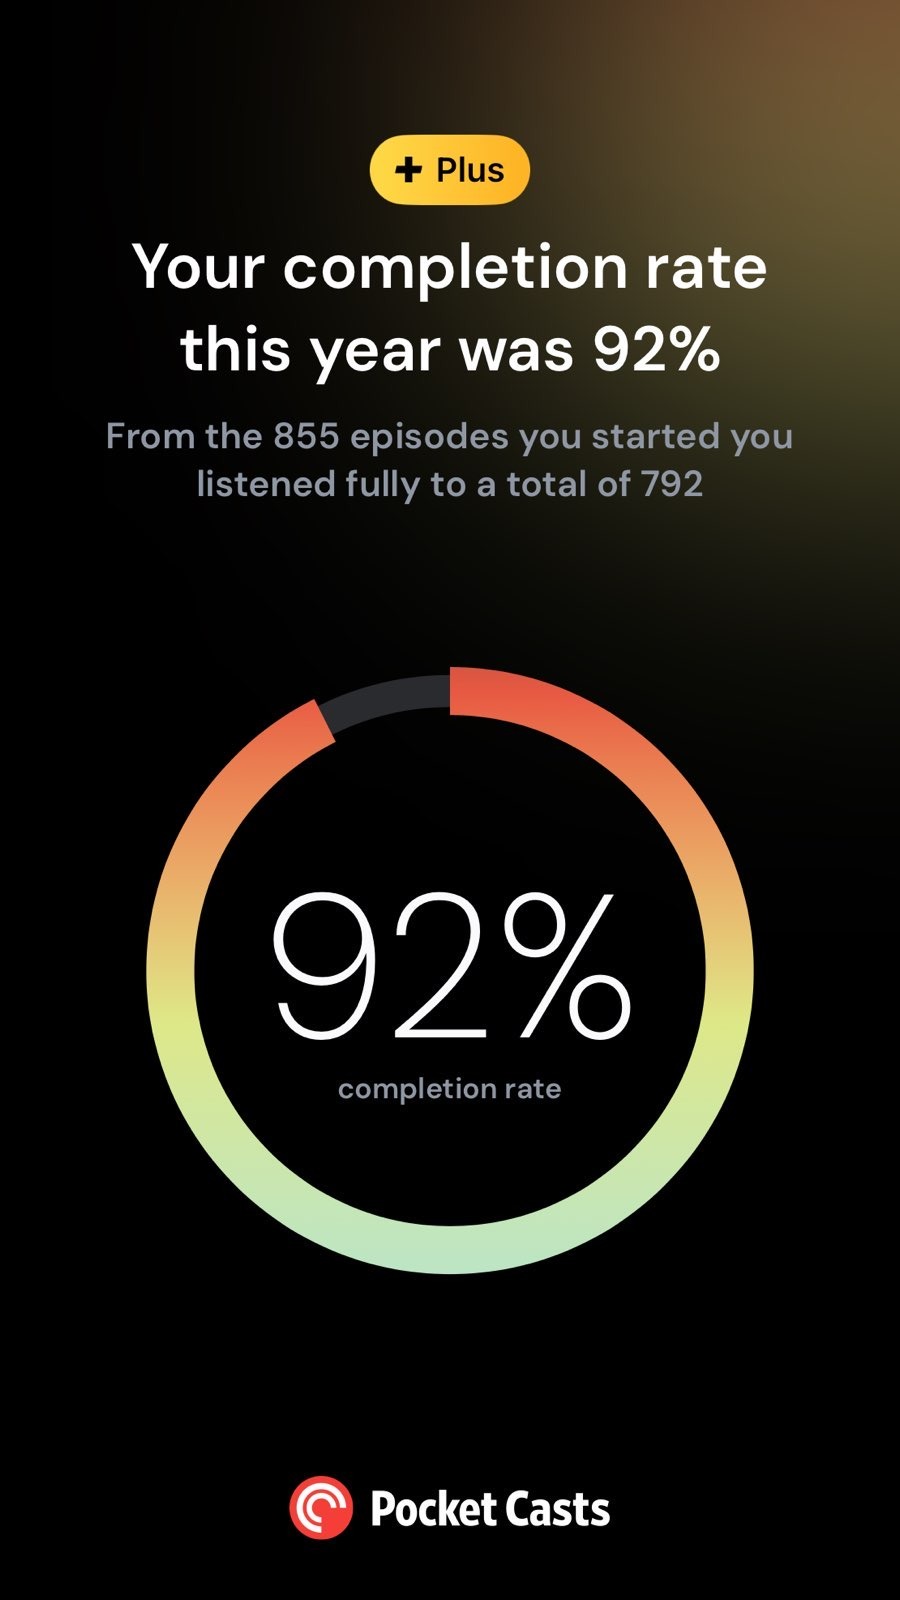 You completion rate this year was 92%. From the 855 episodes you started you listened fully to a total of 792.